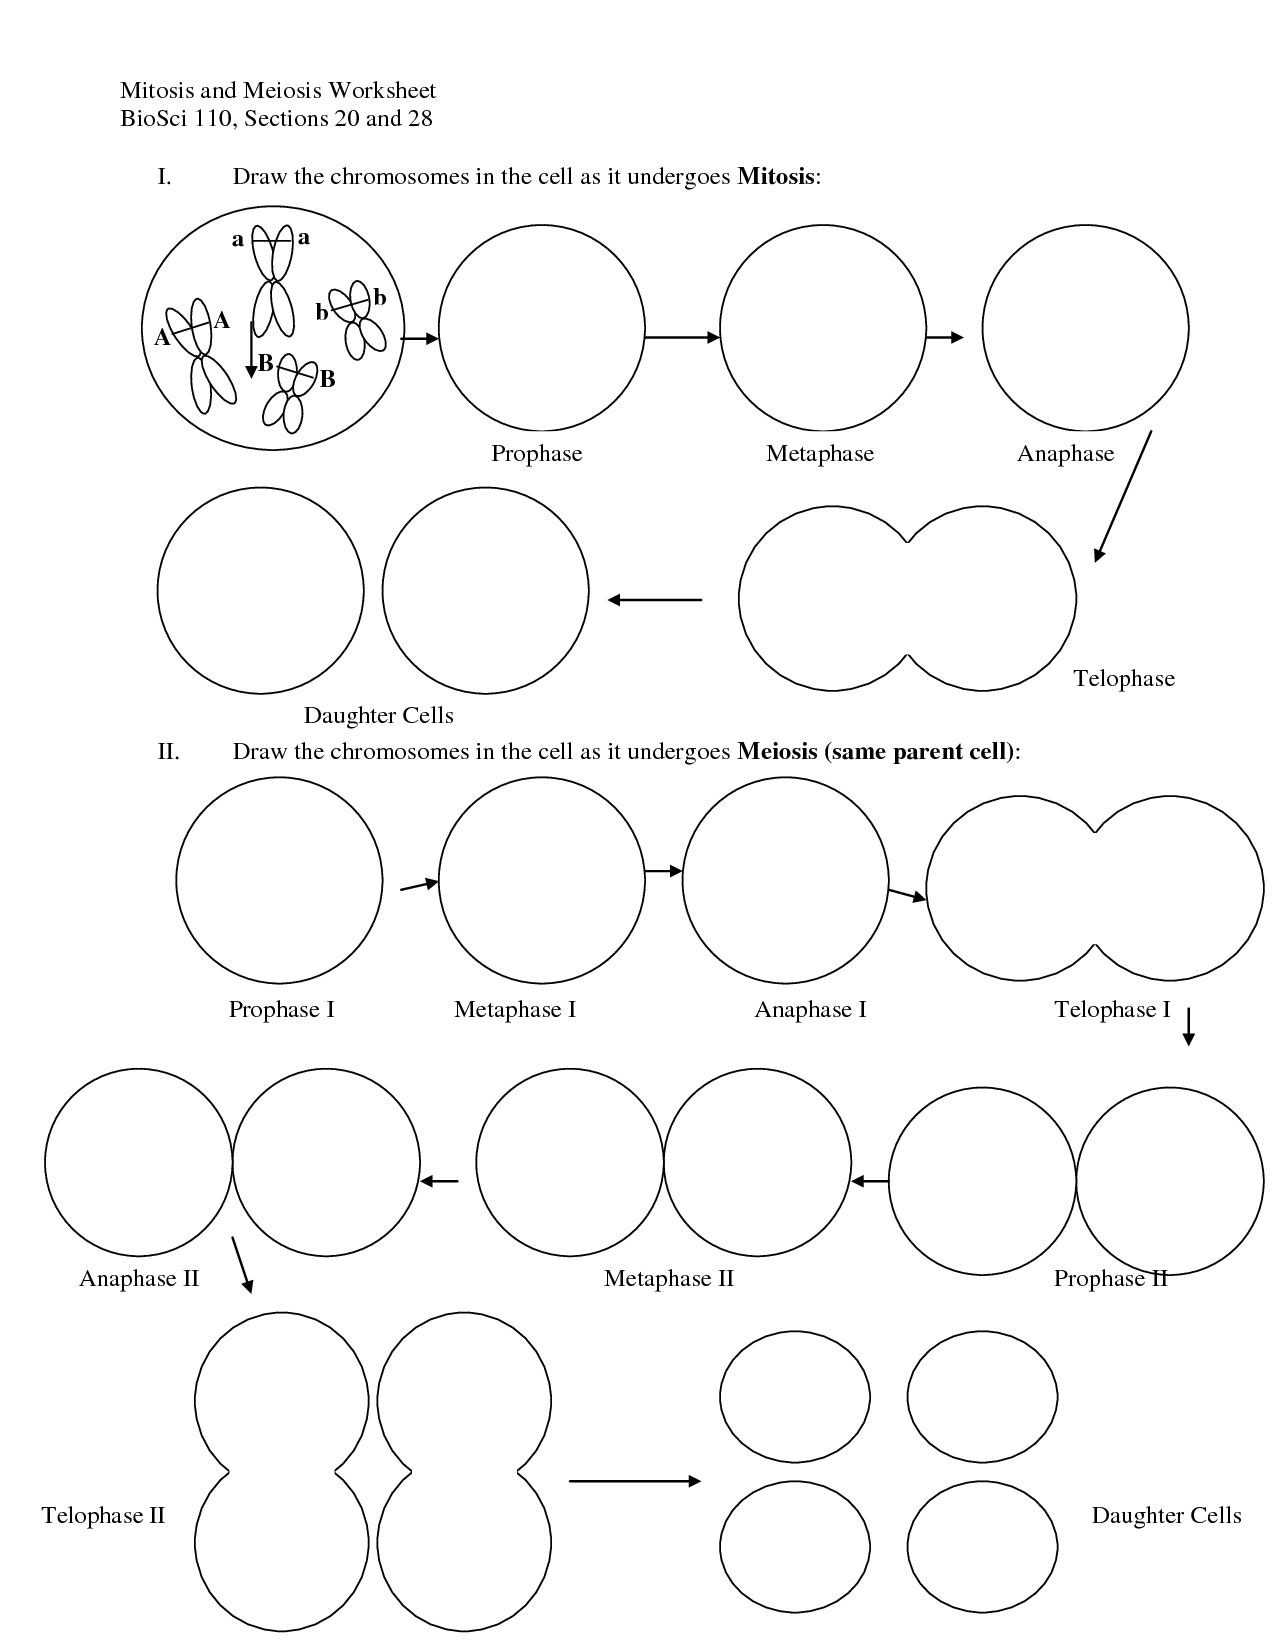 9-best-images-of-skin-coloring-worksheet-black-and-white-integumentary-system-diagram-meiosis